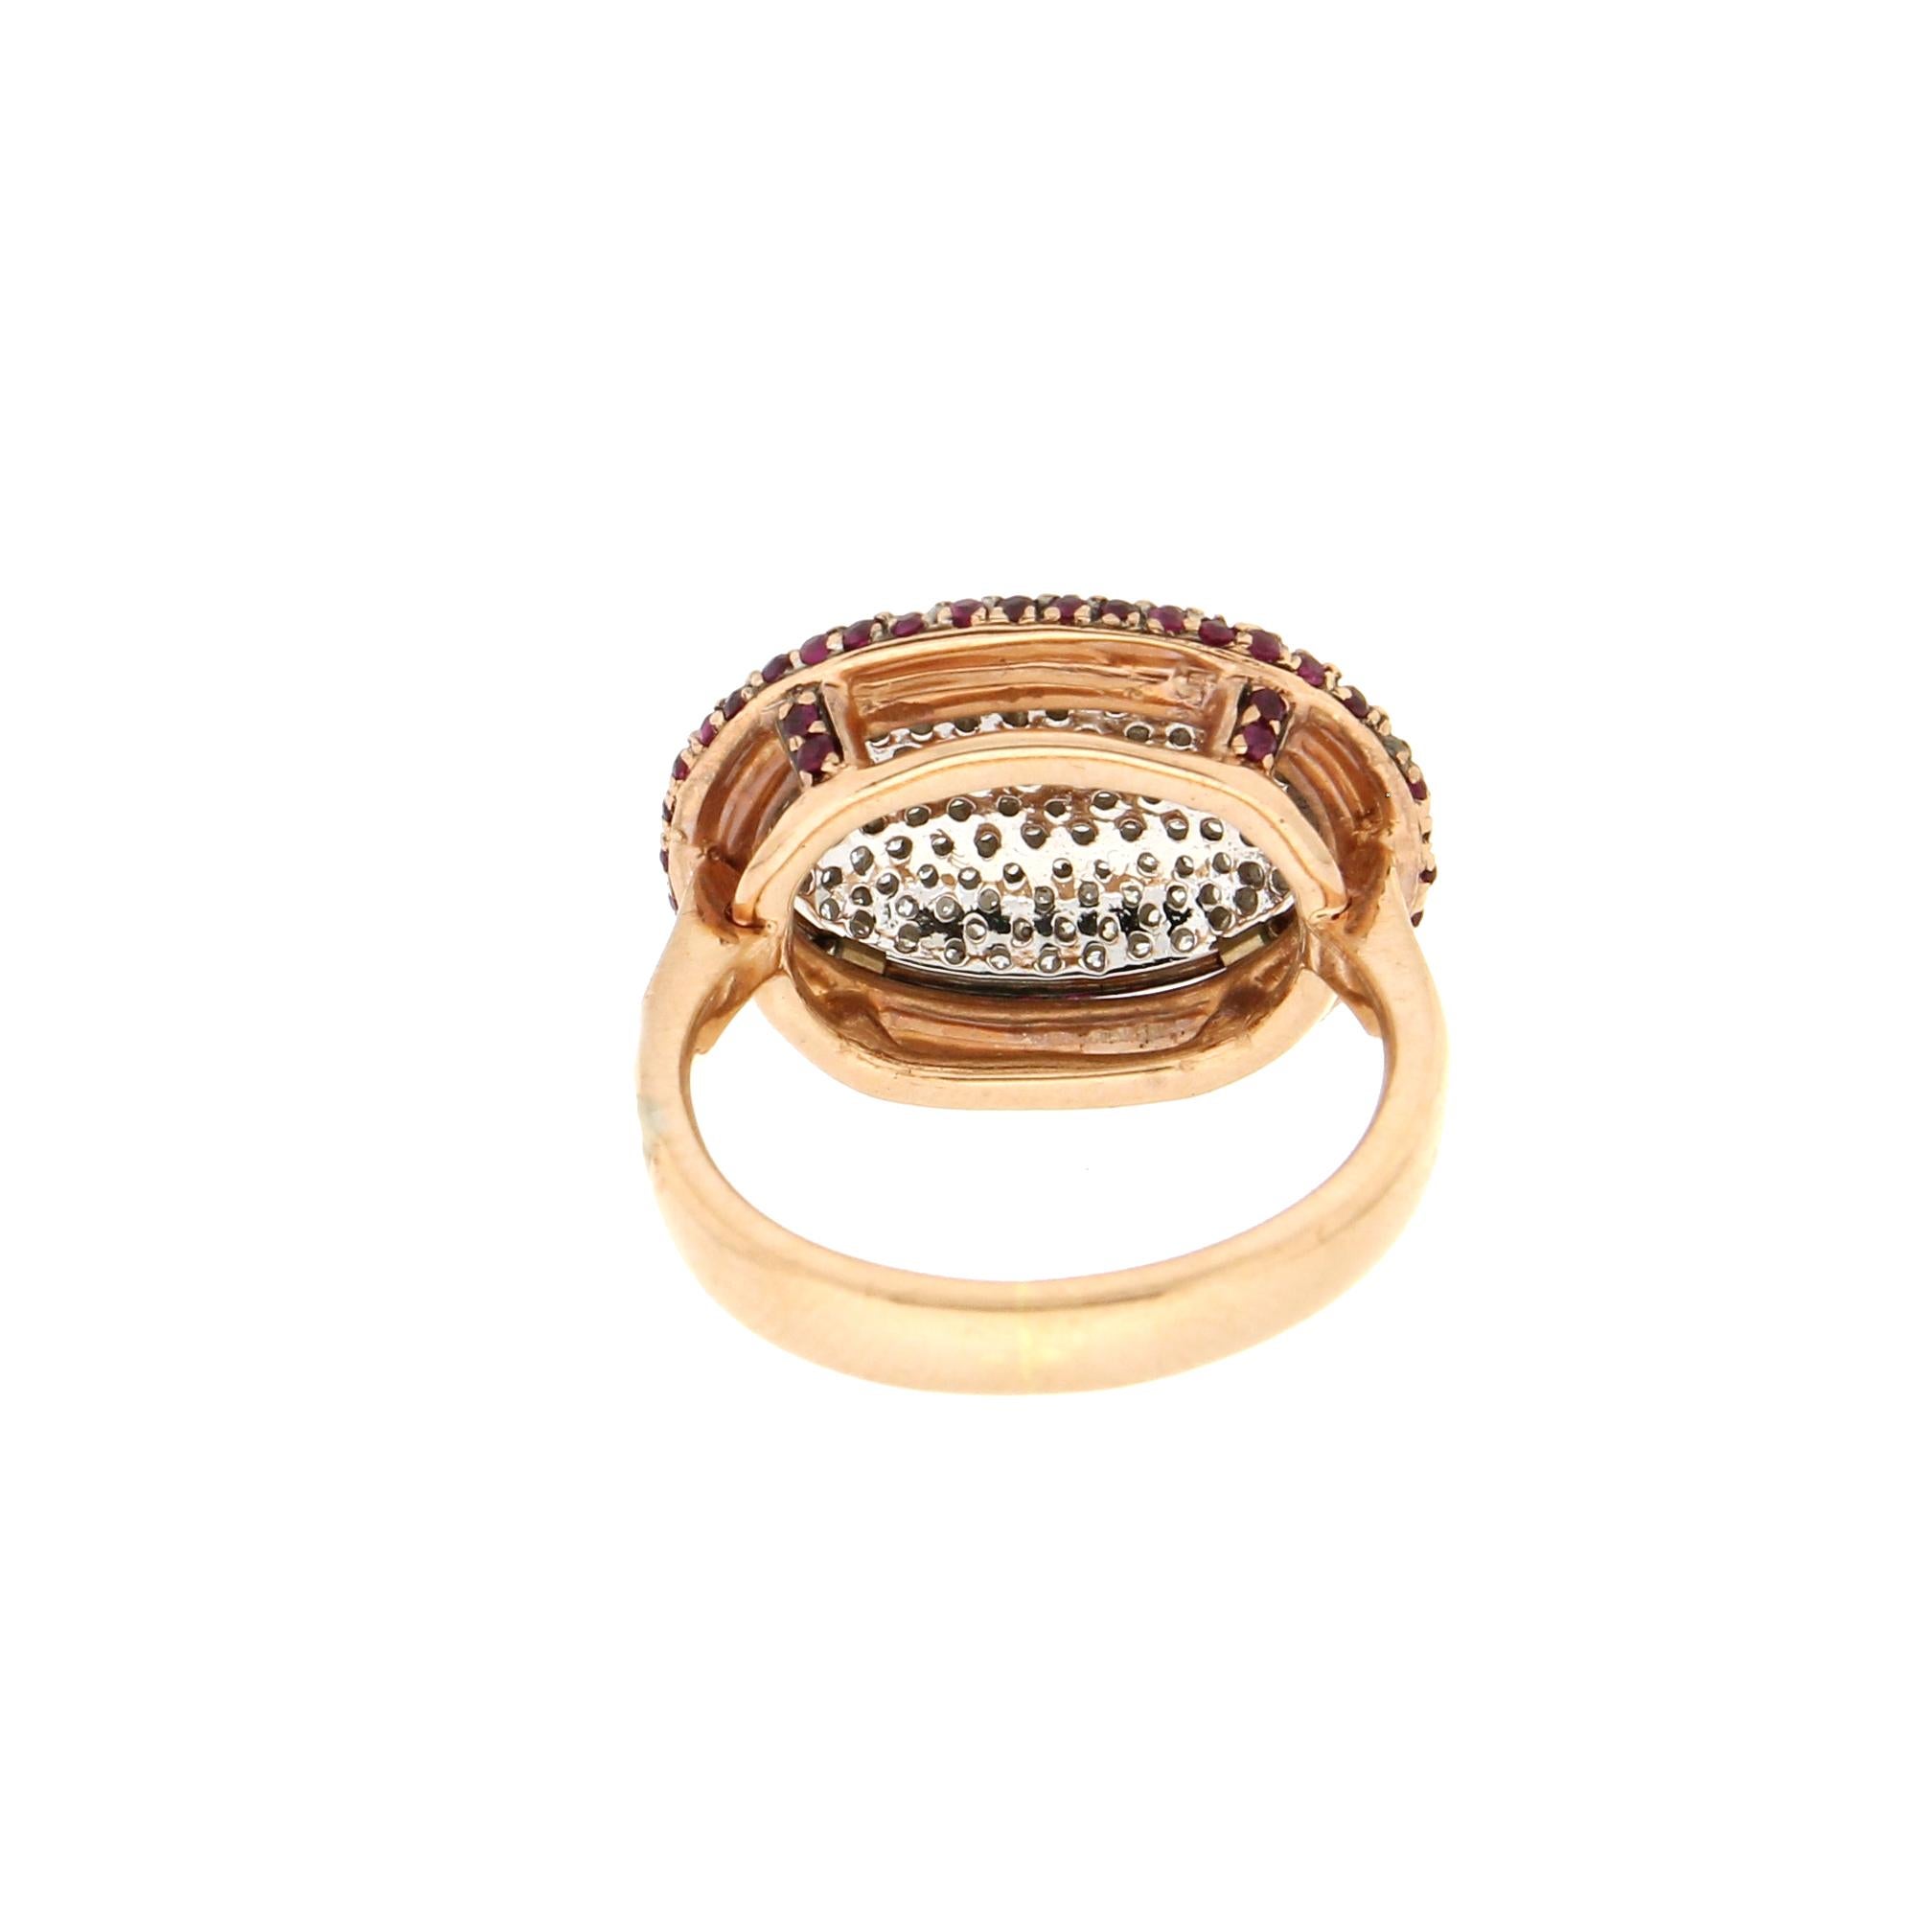 Handcraft Rubies 18 Karat White and Yellow Gold Diamonds Cocktail Ring In New Condition For Sale In Marcianise, IT